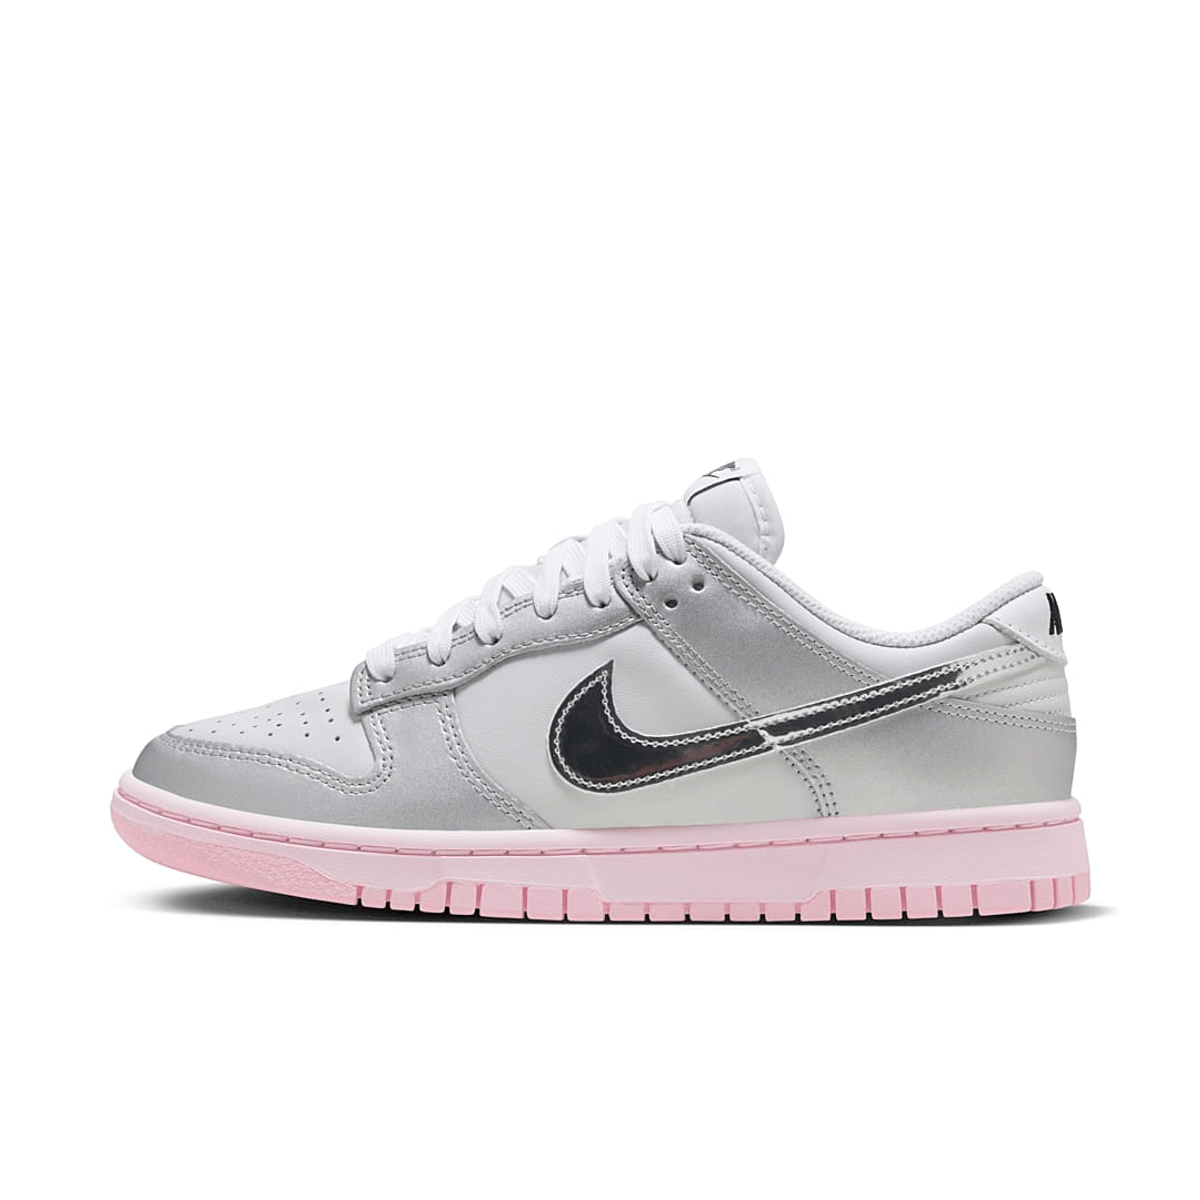 Official Images Of The Upcoming Nike Dunk Low LX "Pink Foam"